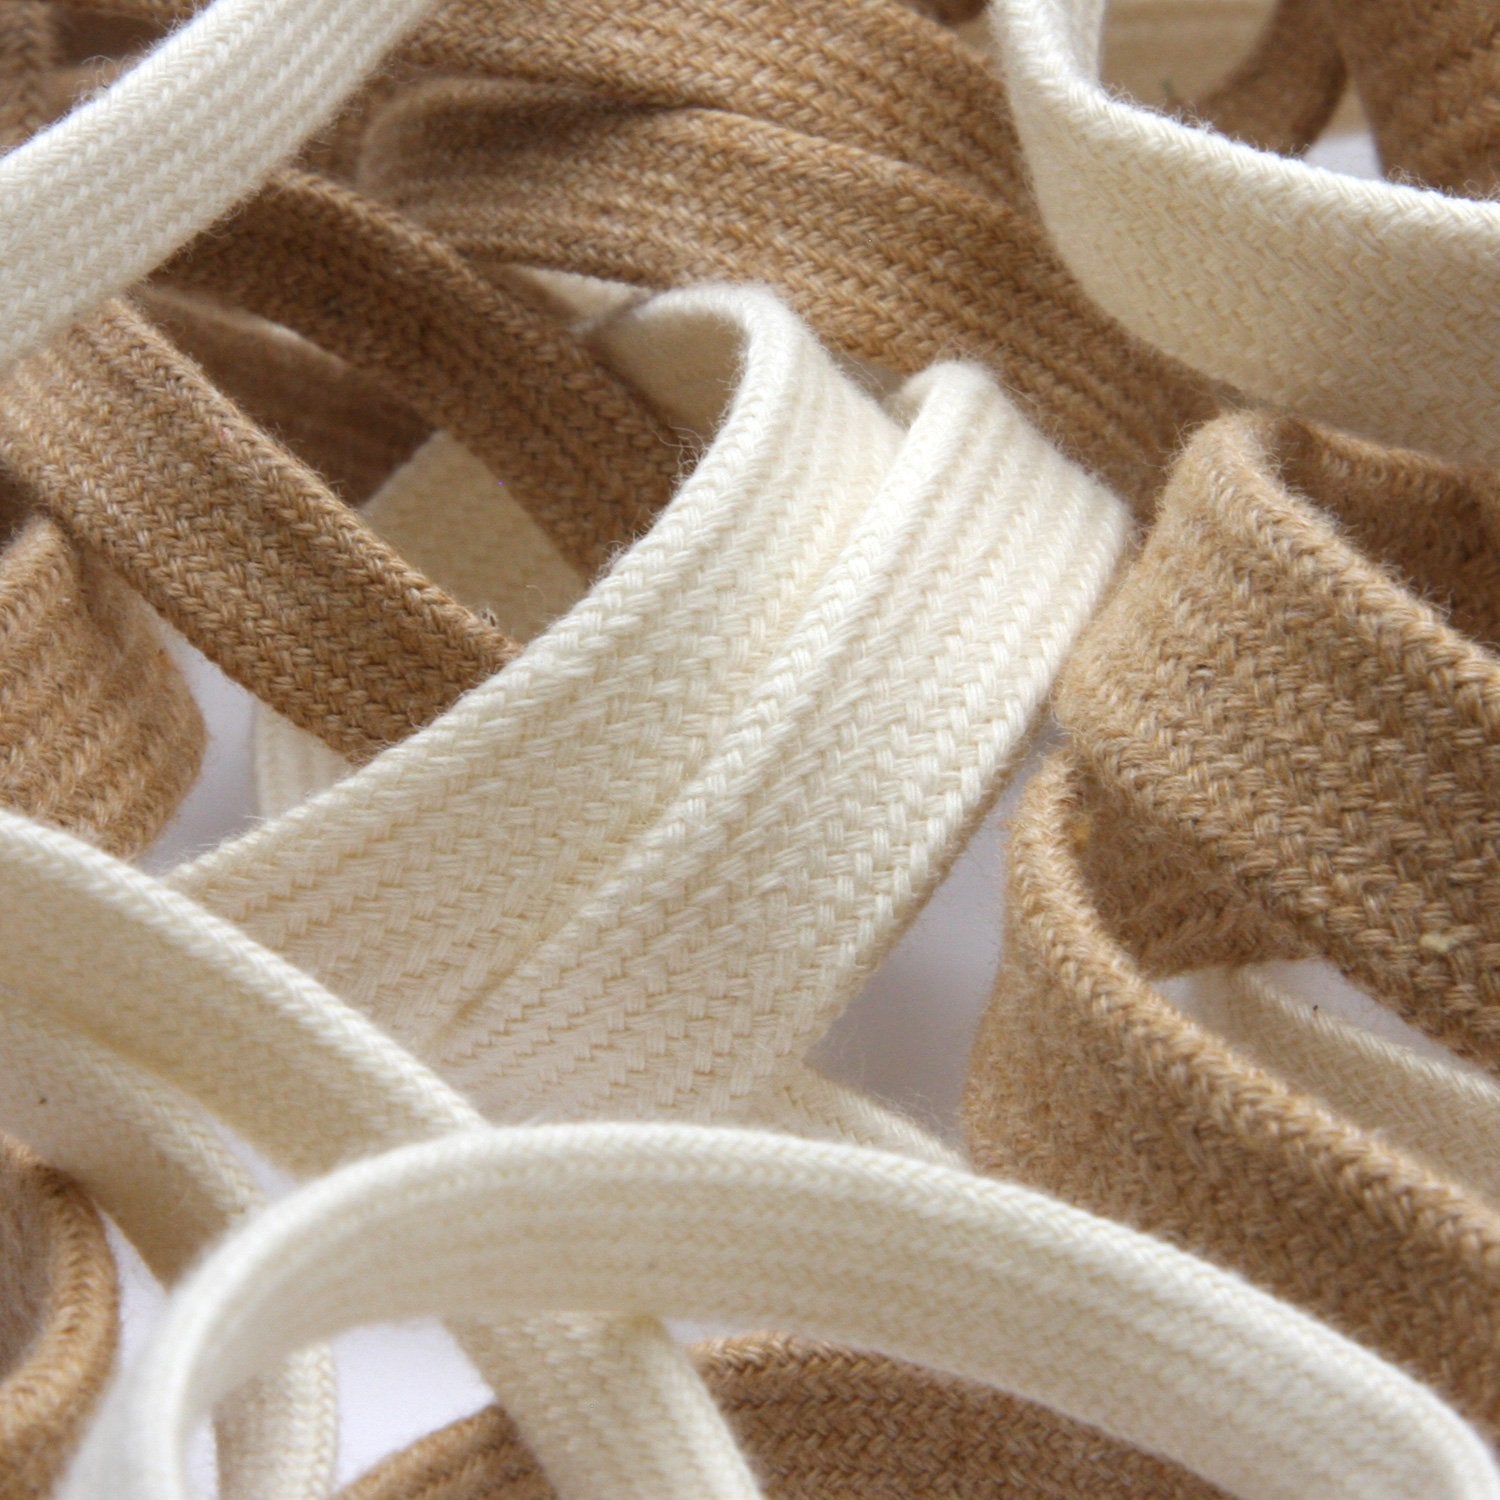 FUJIYAMA RIBBON [Wholesale] Organic Cotton Spindle Cord approx.7mm 50 Meters Roll